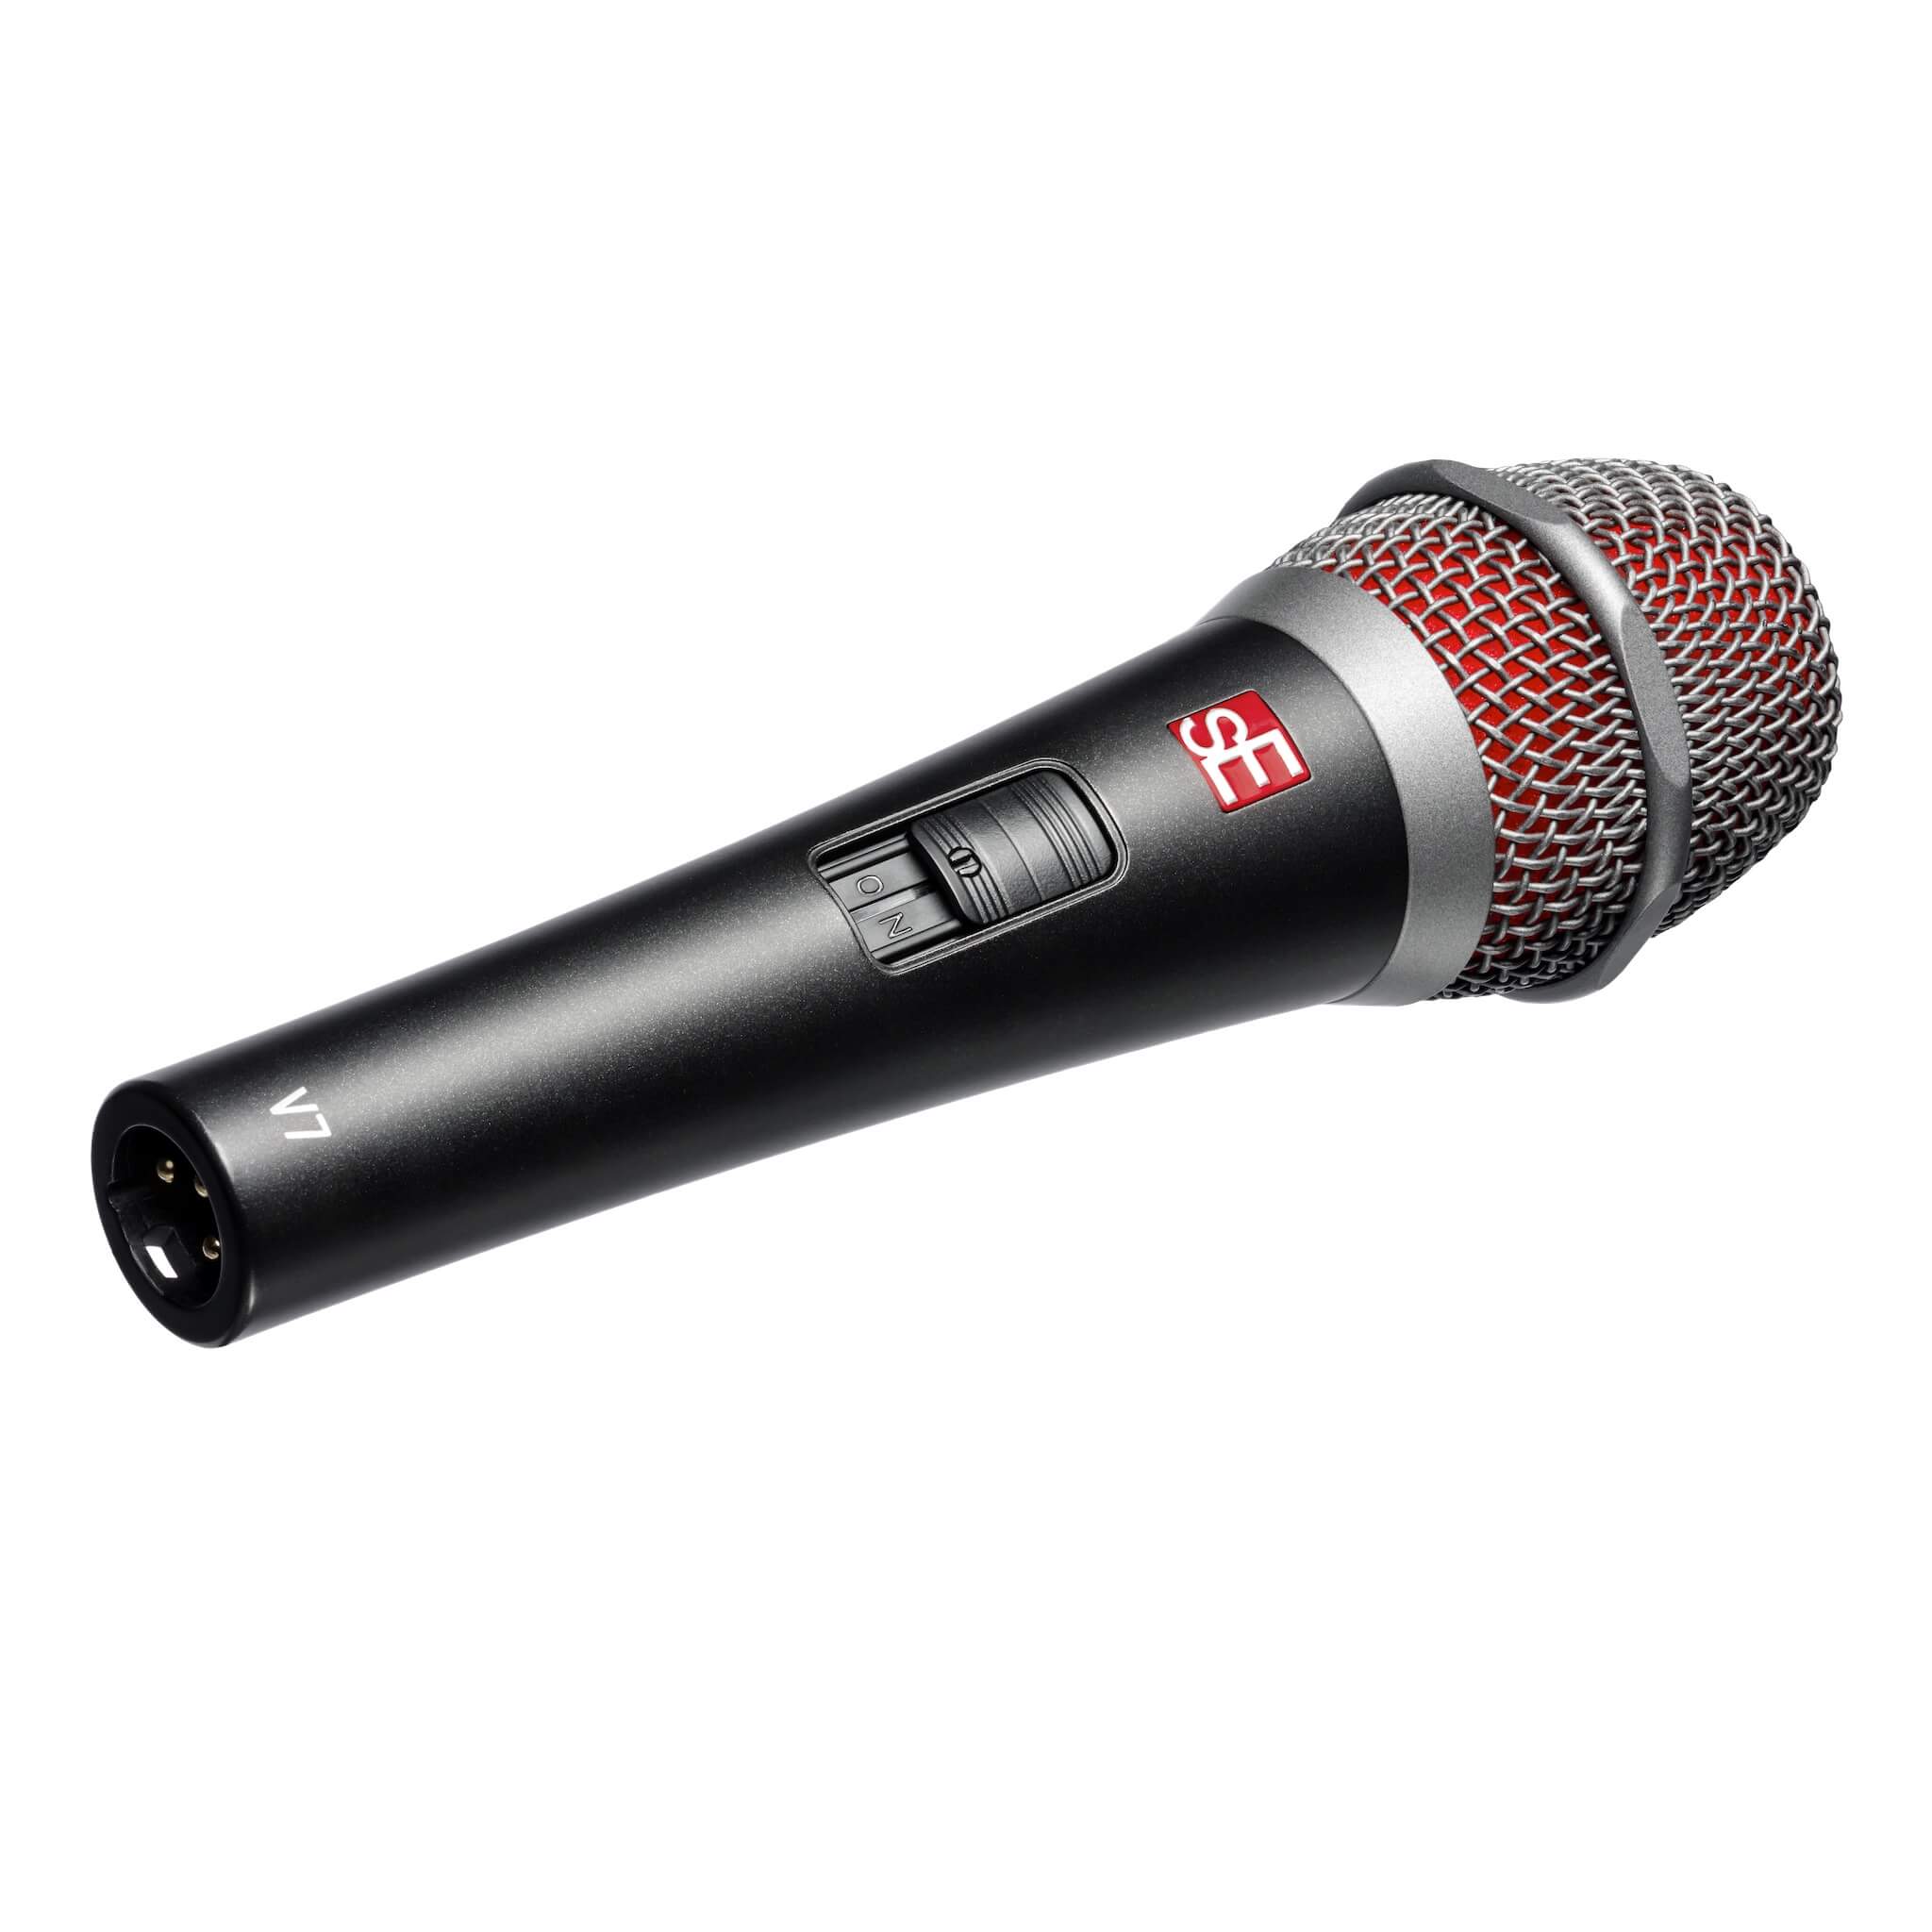 sE Electronics V7 SWITCH - Supercardioid Dynamic Vocal Microphone